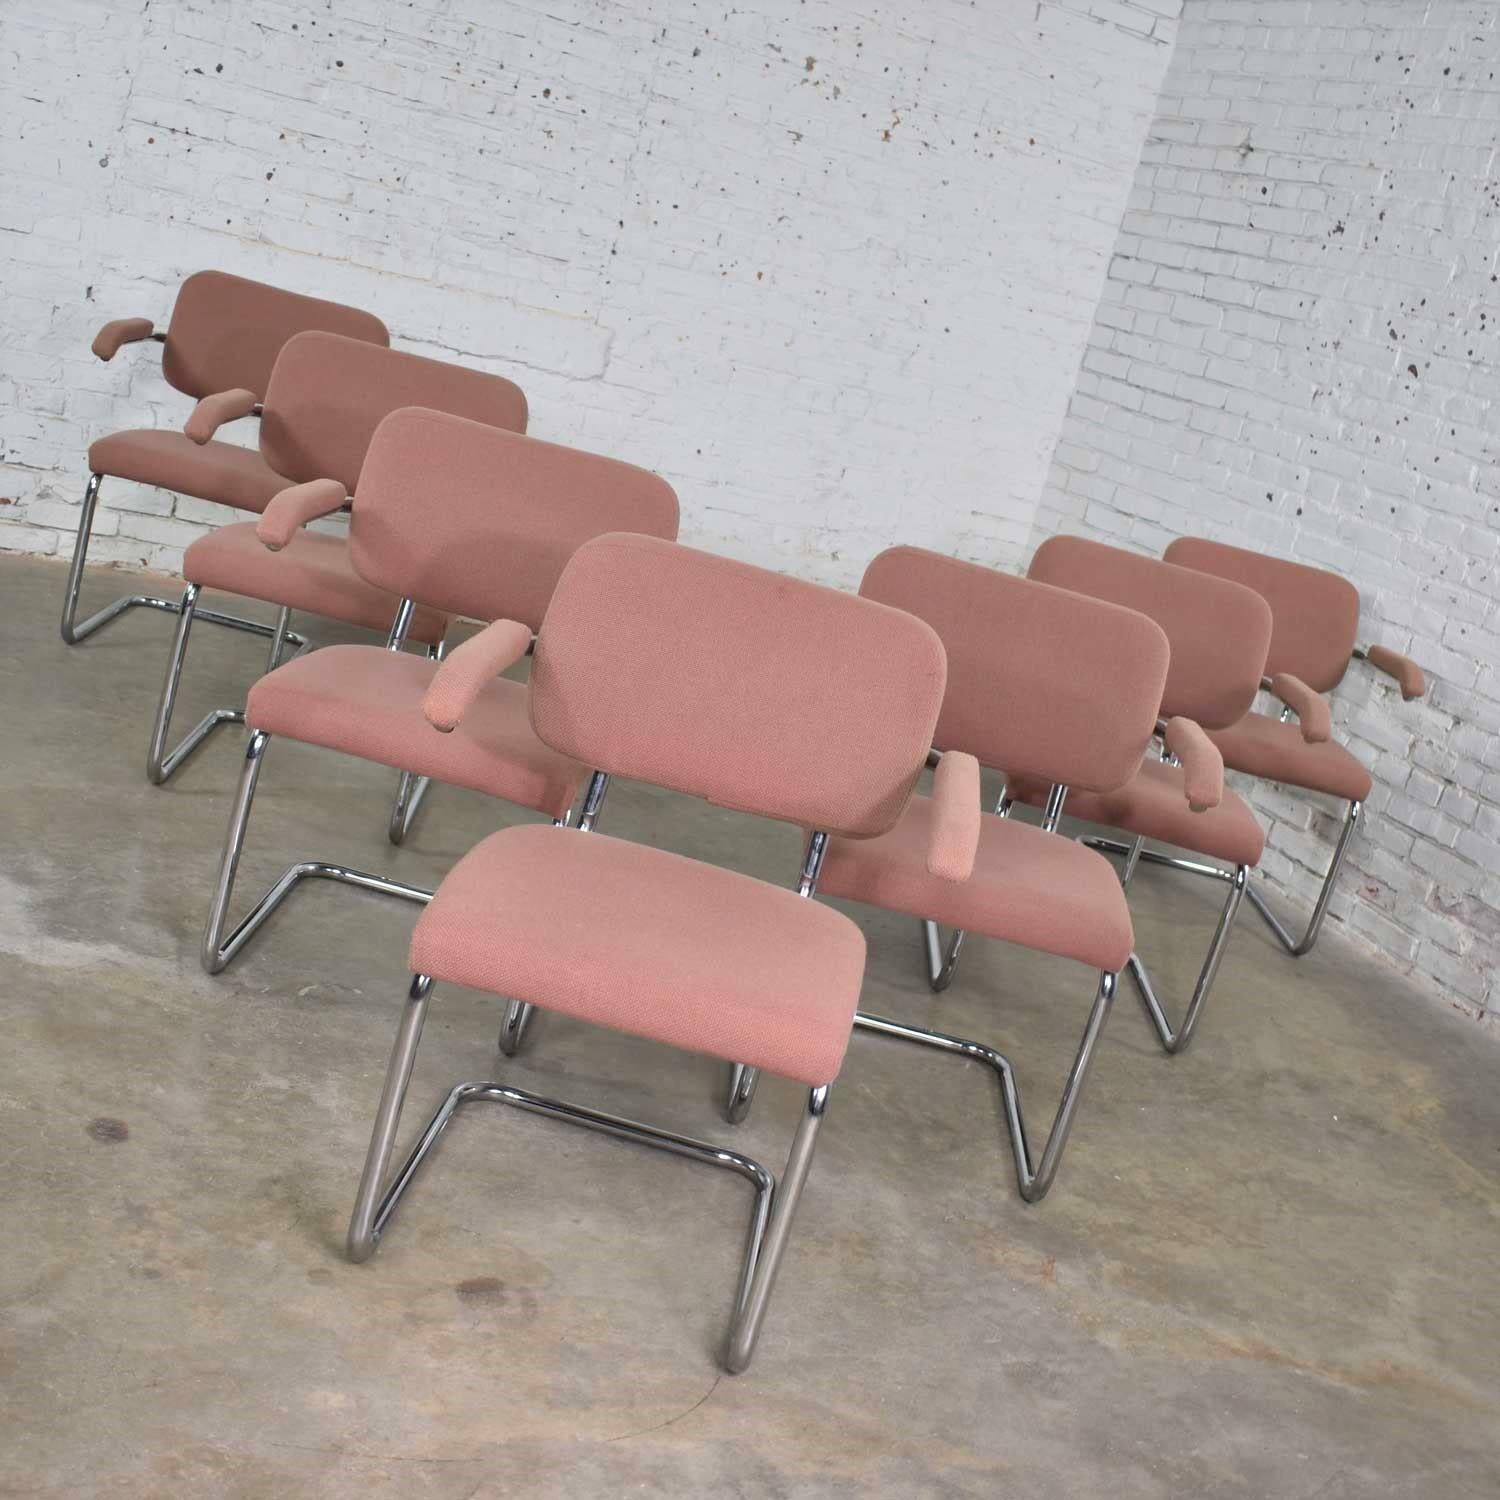 Bauhaus Set of 7 Cantilevered Chrome and Mauve Breuer Cesca Style Dining Chairs by Virco